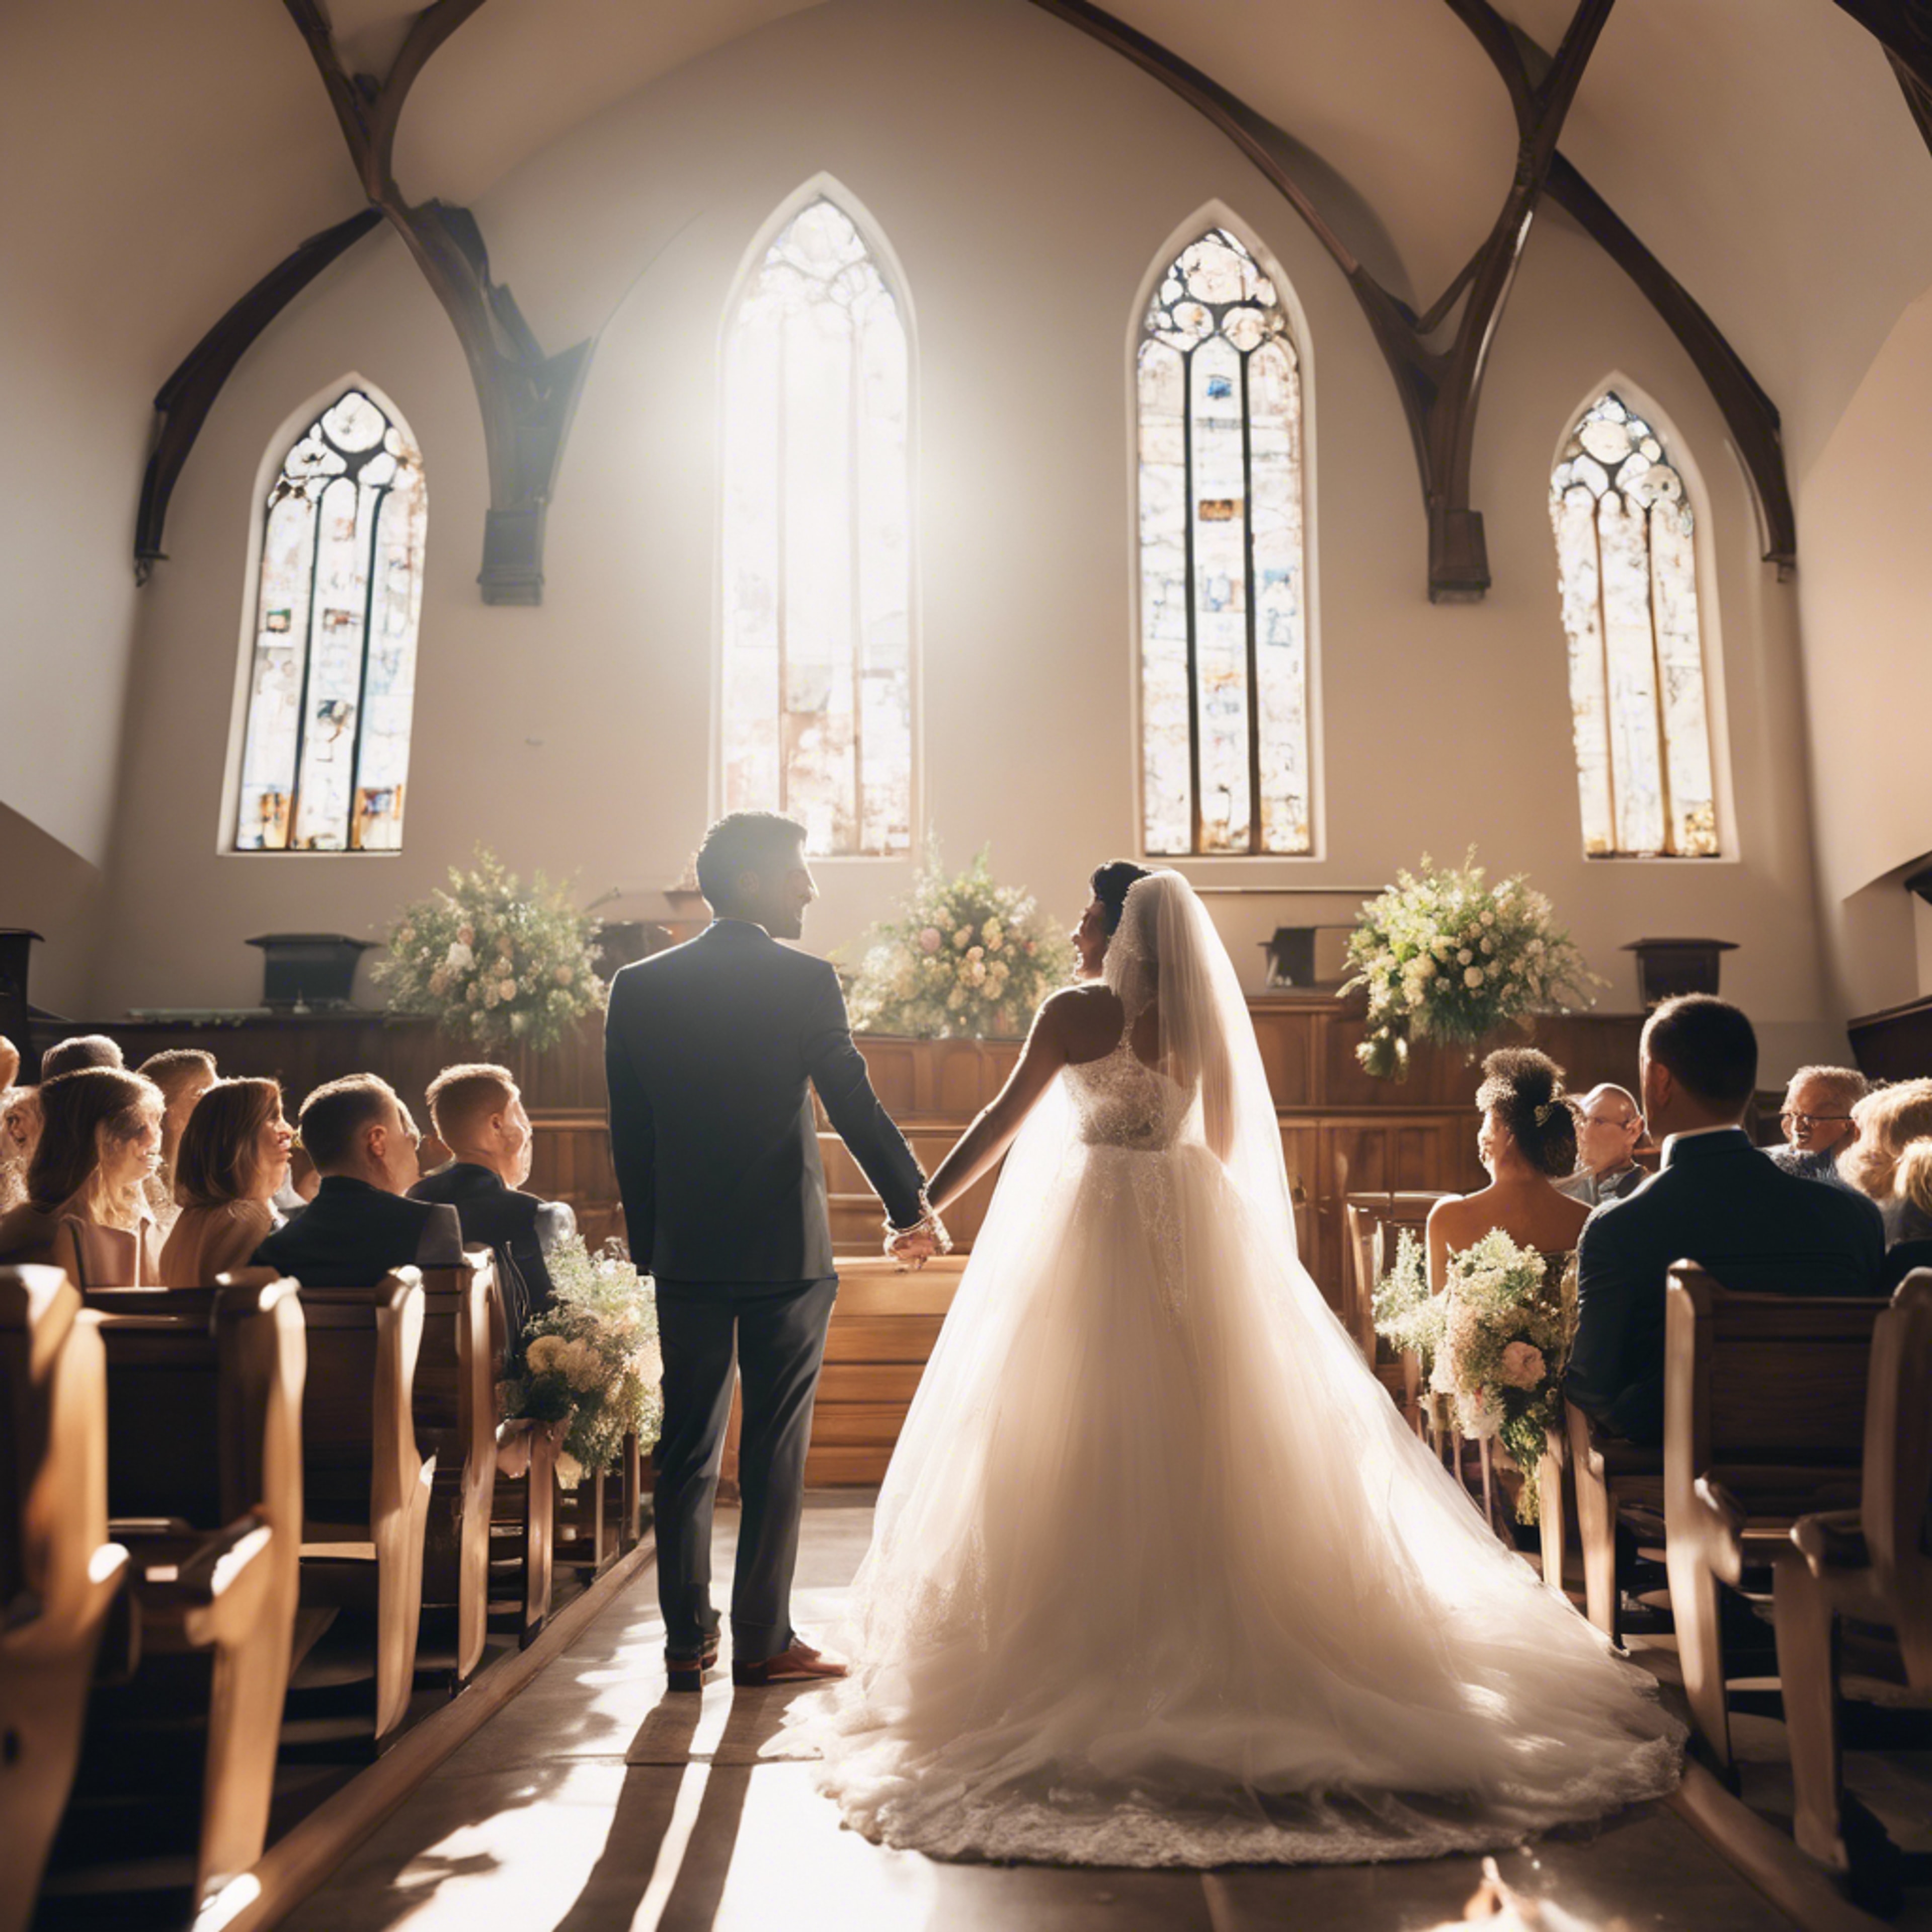 A happy couple getting married in a sunlit church, filled with joy and love. Шпалери[c91a19bd1c8e4c9b9bbb]